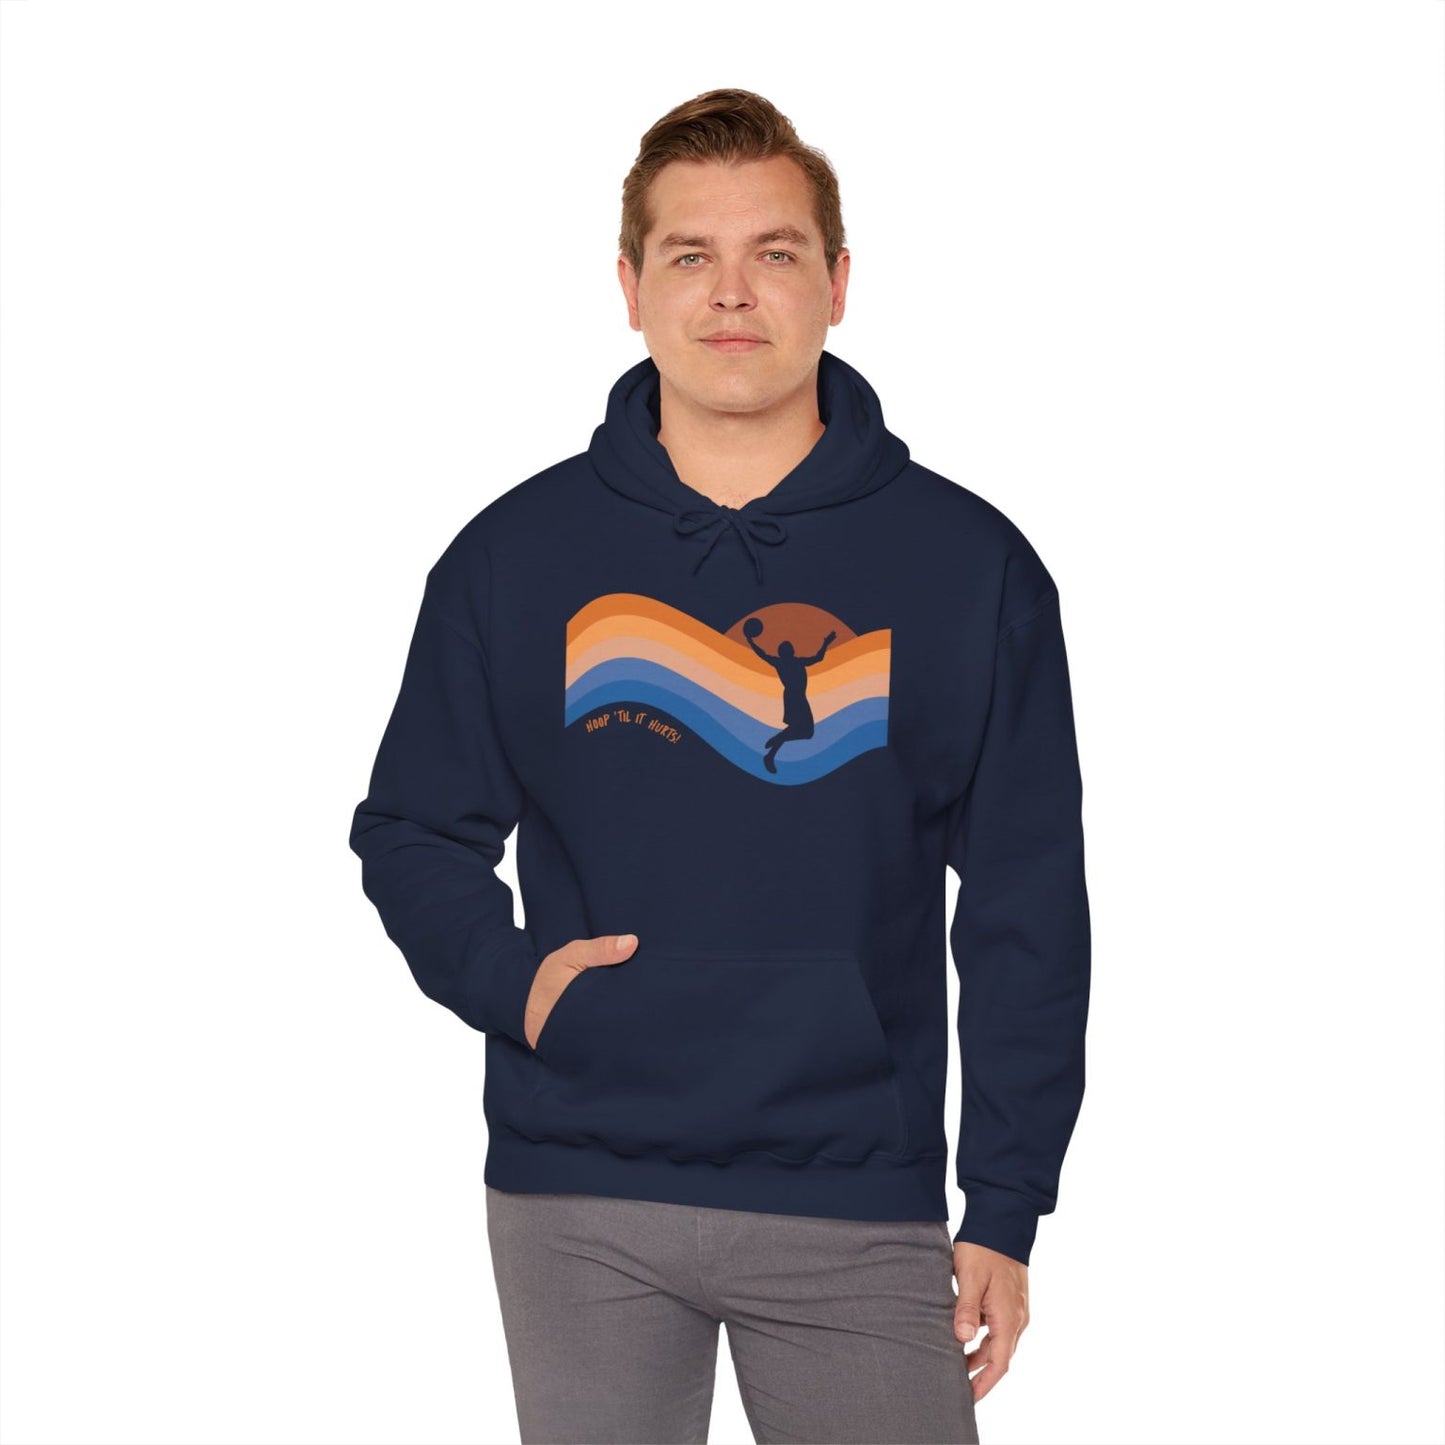 Venice Beach Sunset Unisex Hoodie - Adult - Available in Four Colors